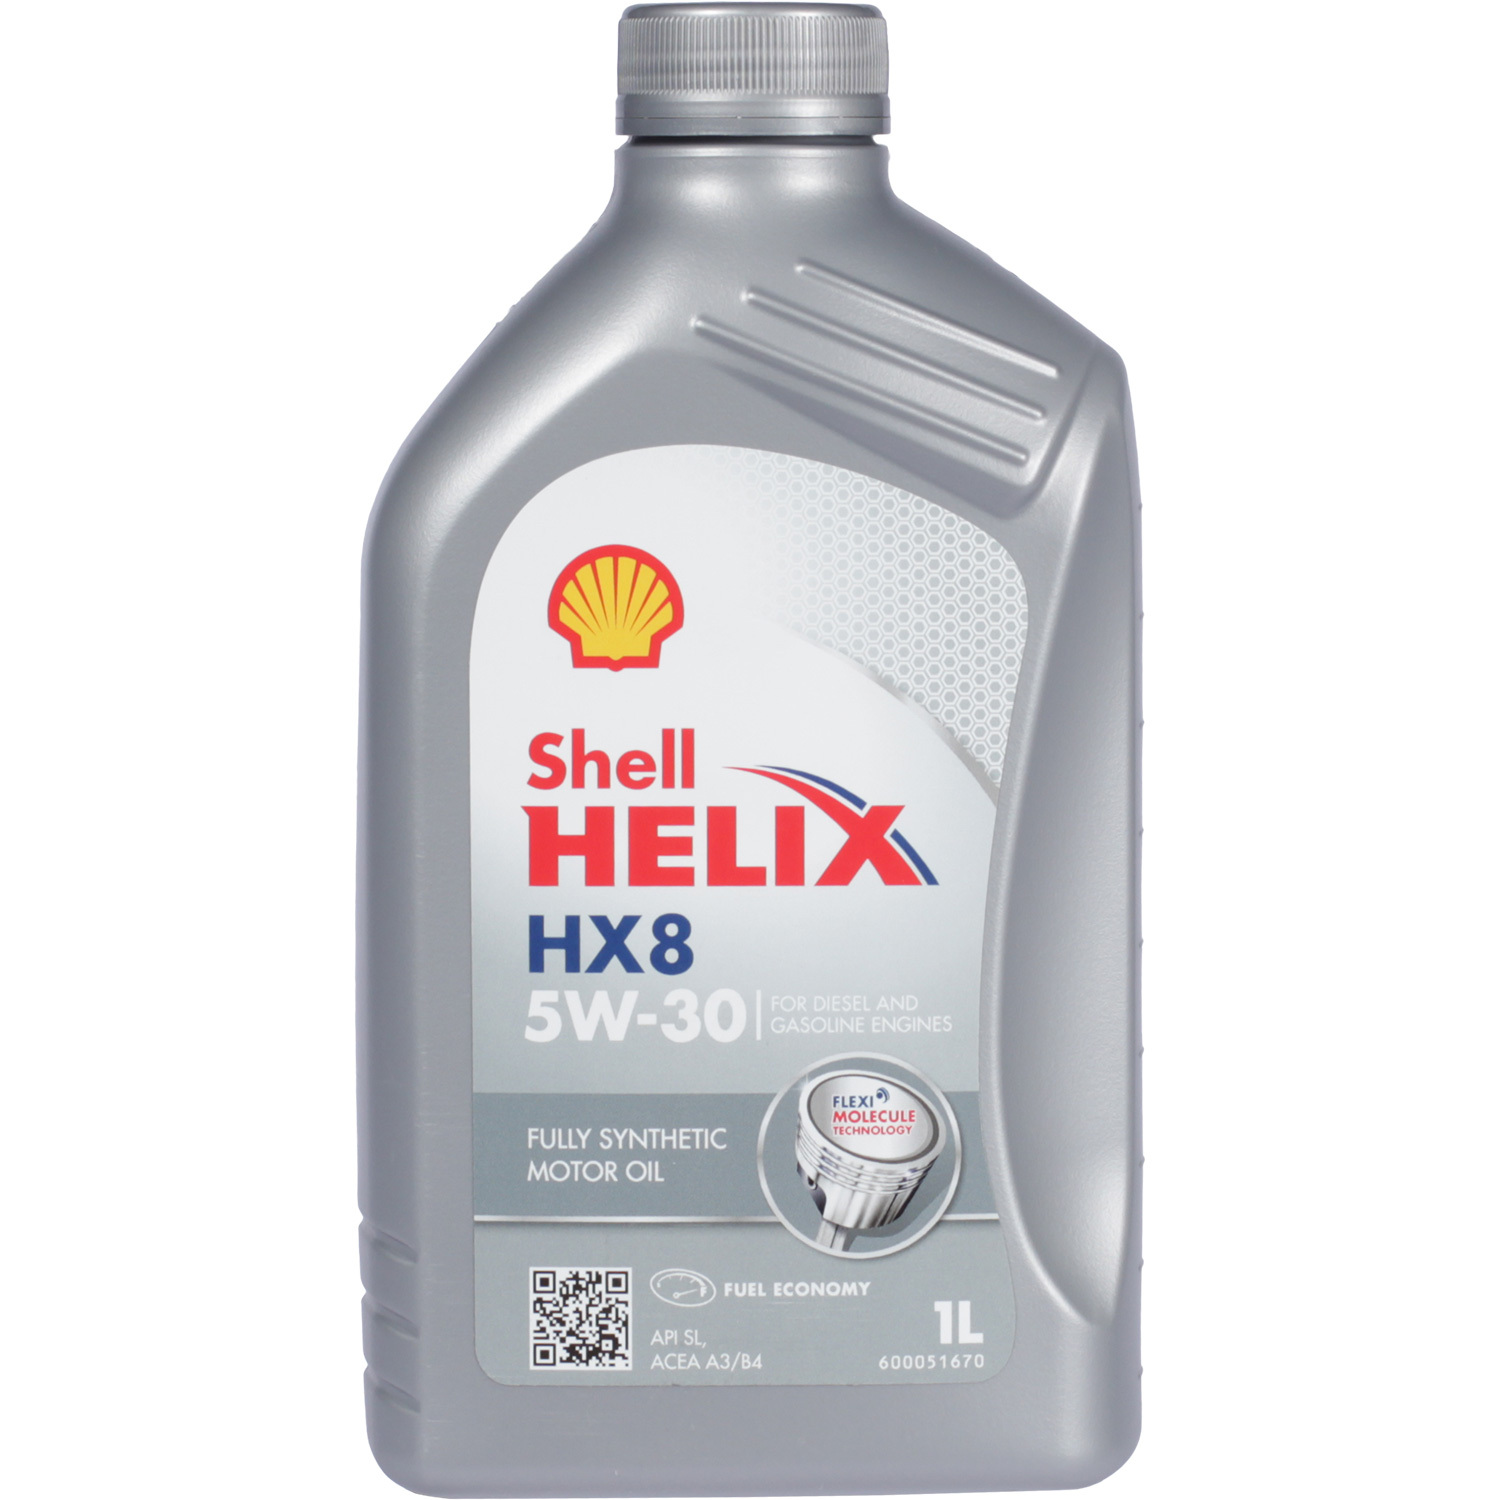 Shell Моторное масло Shell Helix HX8 5W-30, 1 л shell моторное масло shell helix hx8 5w 30 4 л